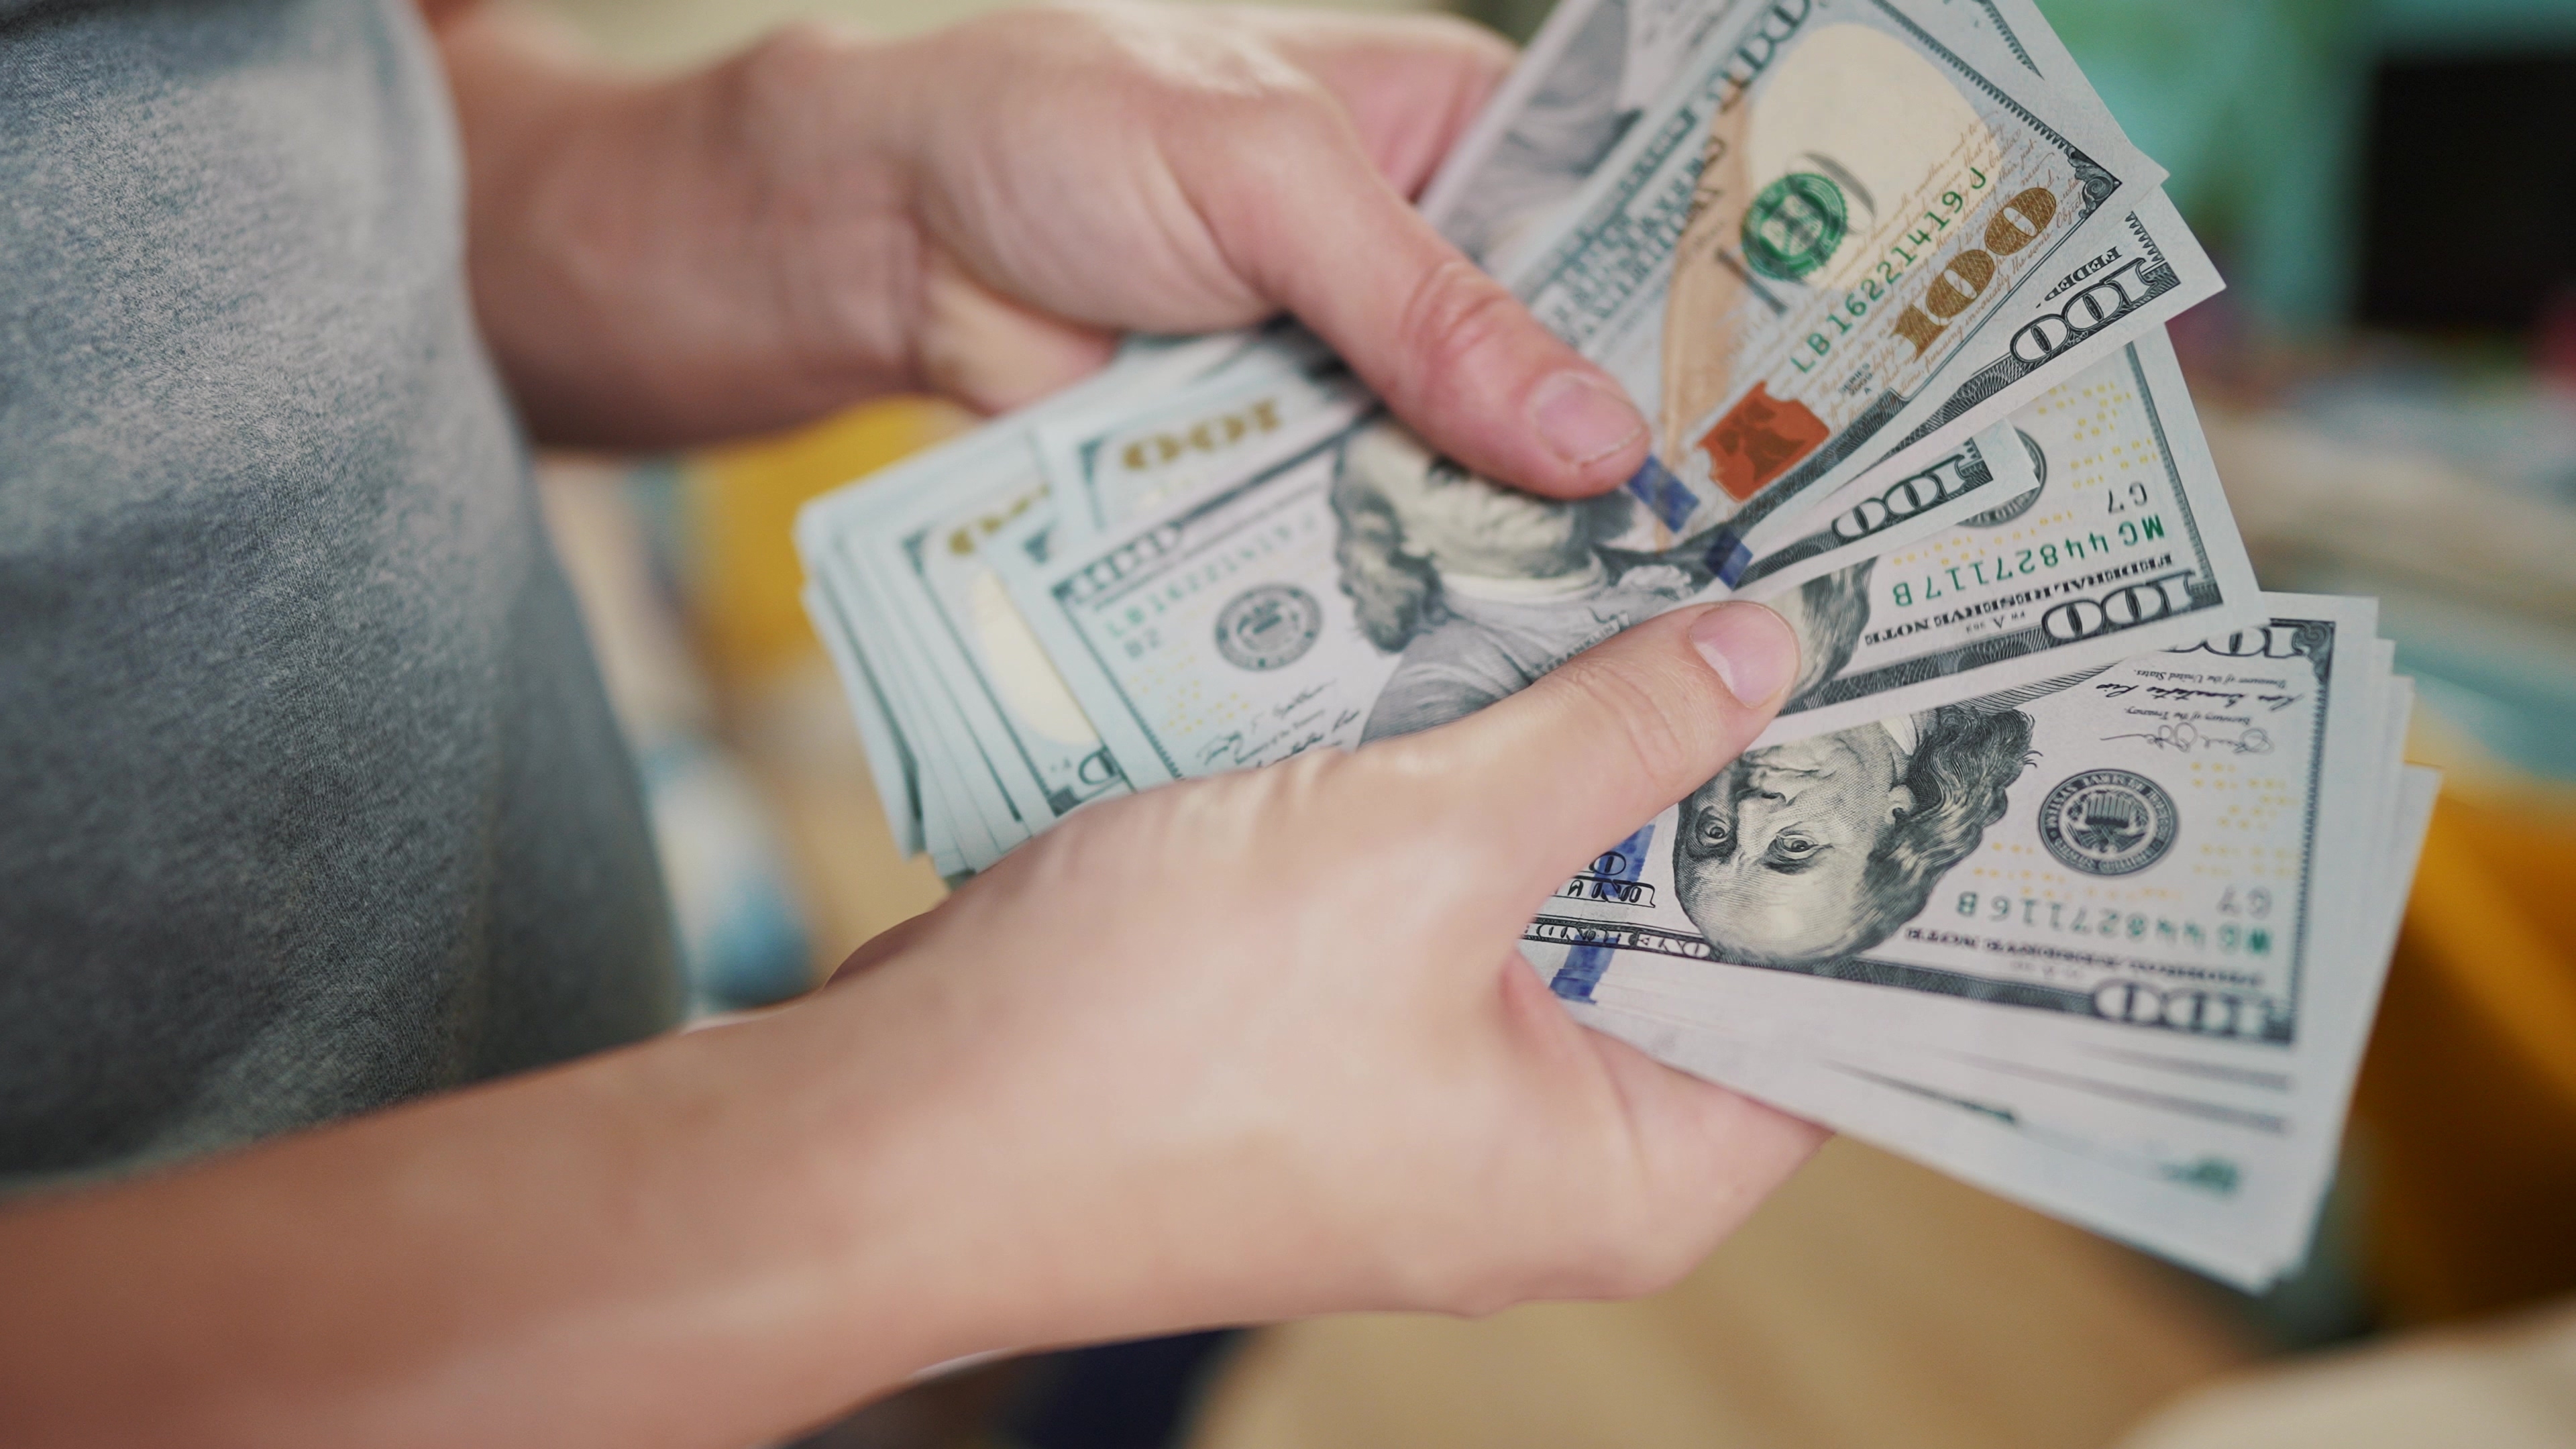 A person holding money | Source: Shutterstock